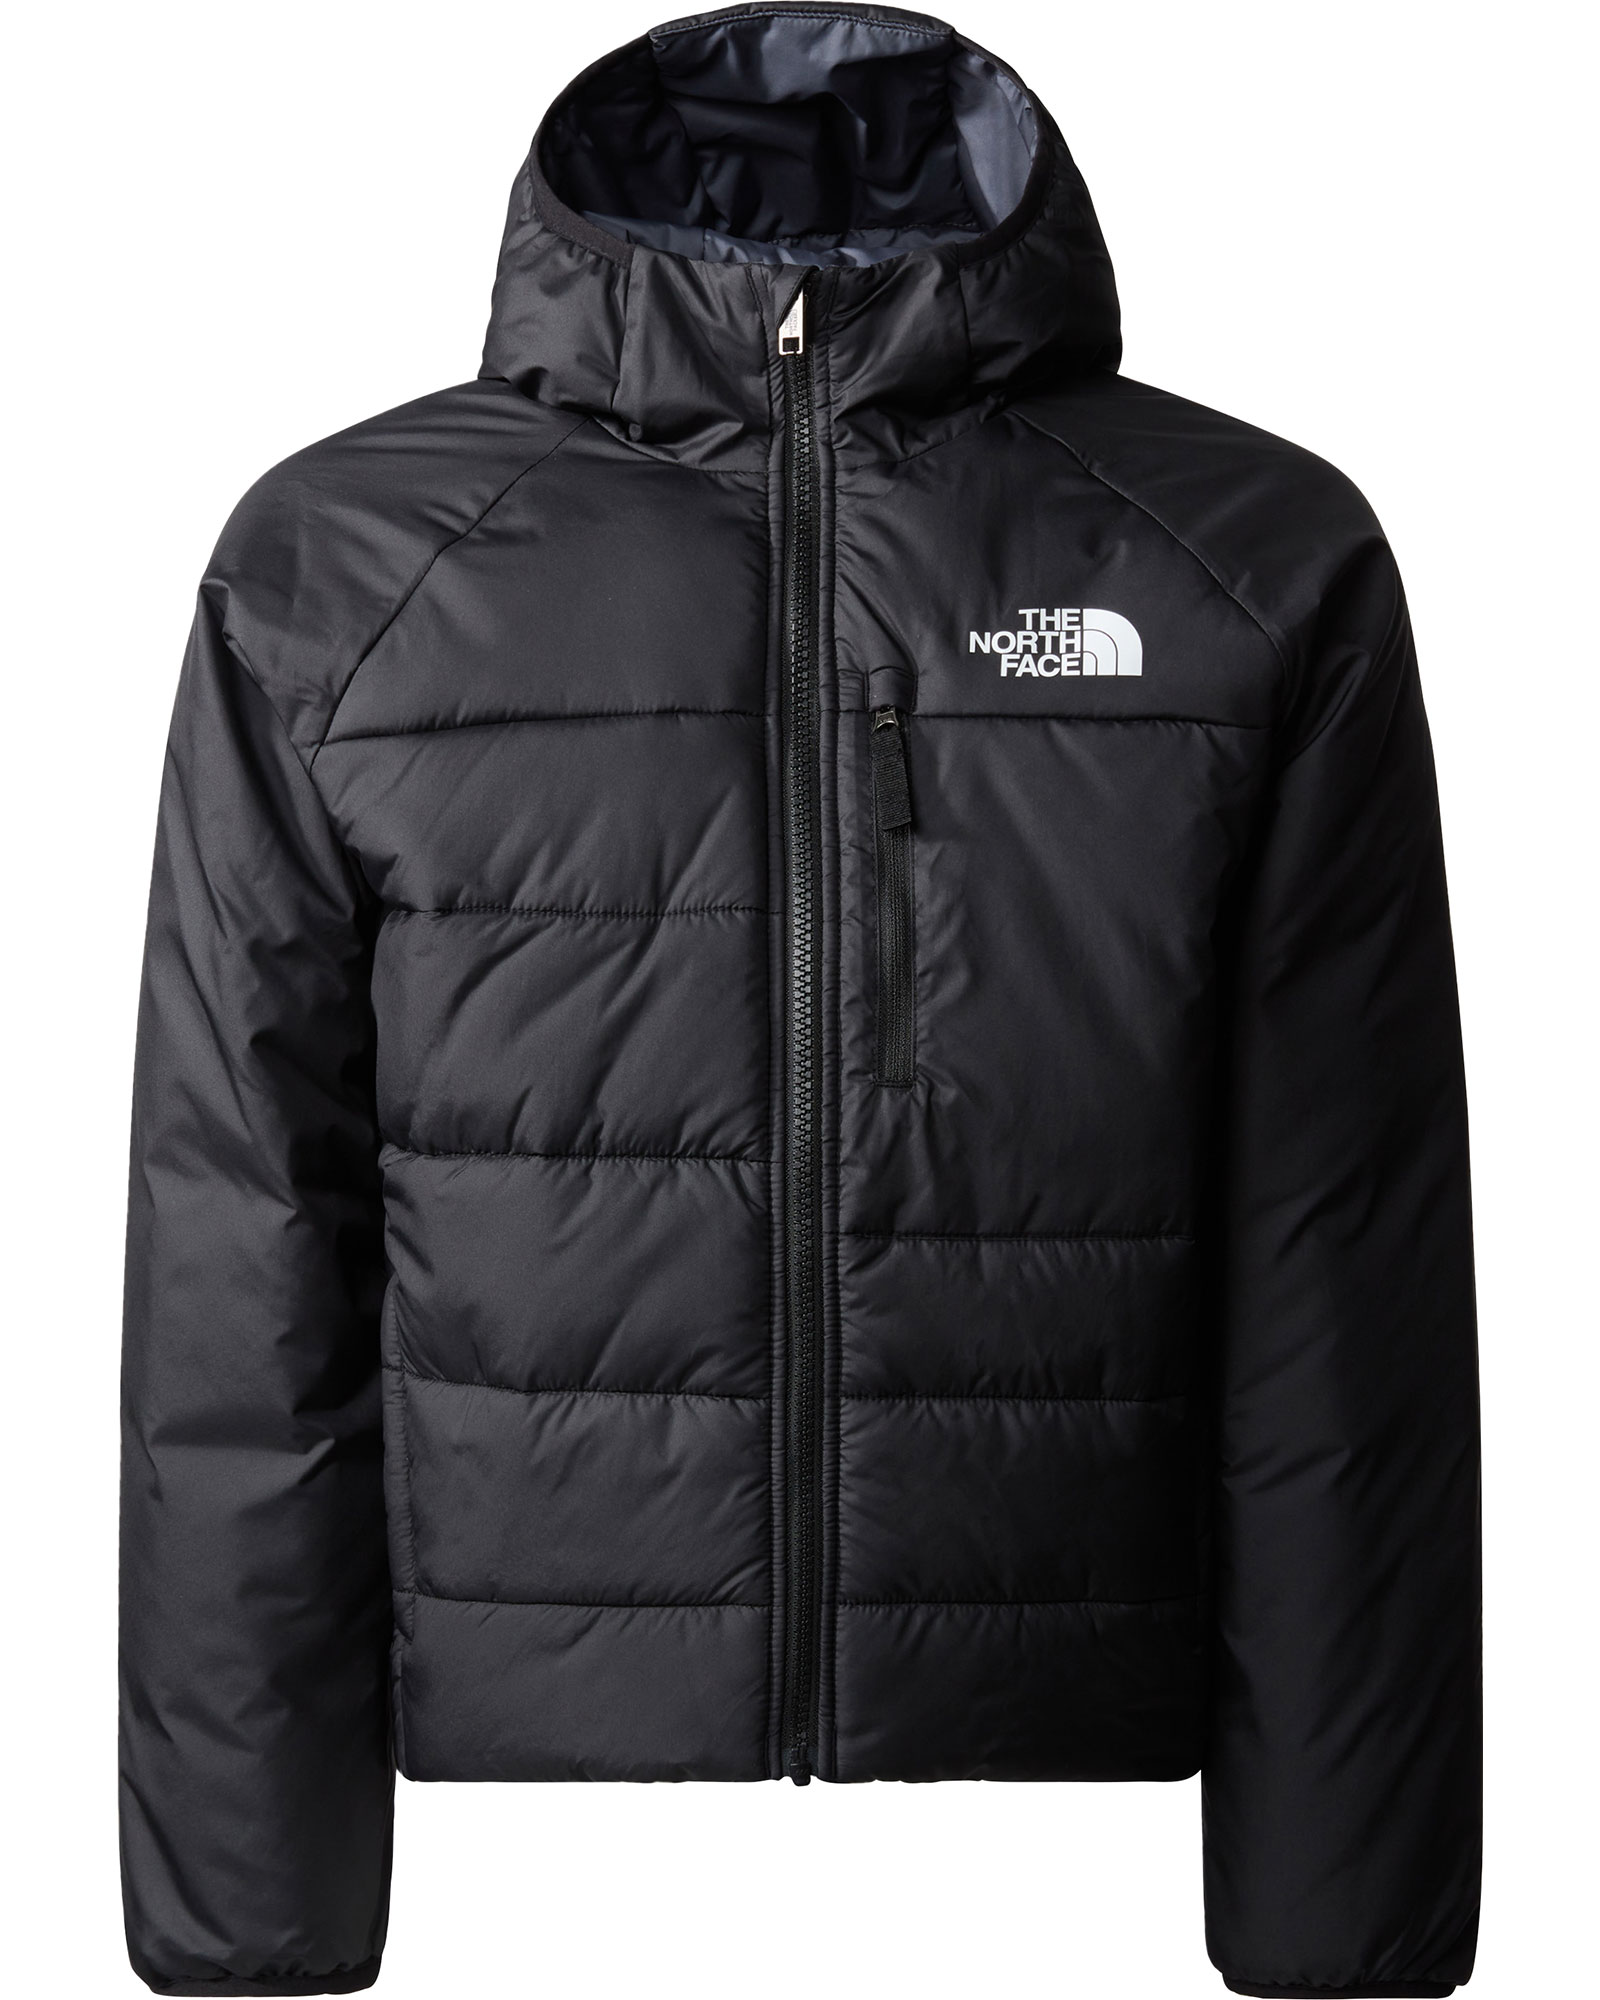 The North Face Boy’s Reversible Perrito Insulated Jacket XL - TNF Black XXL